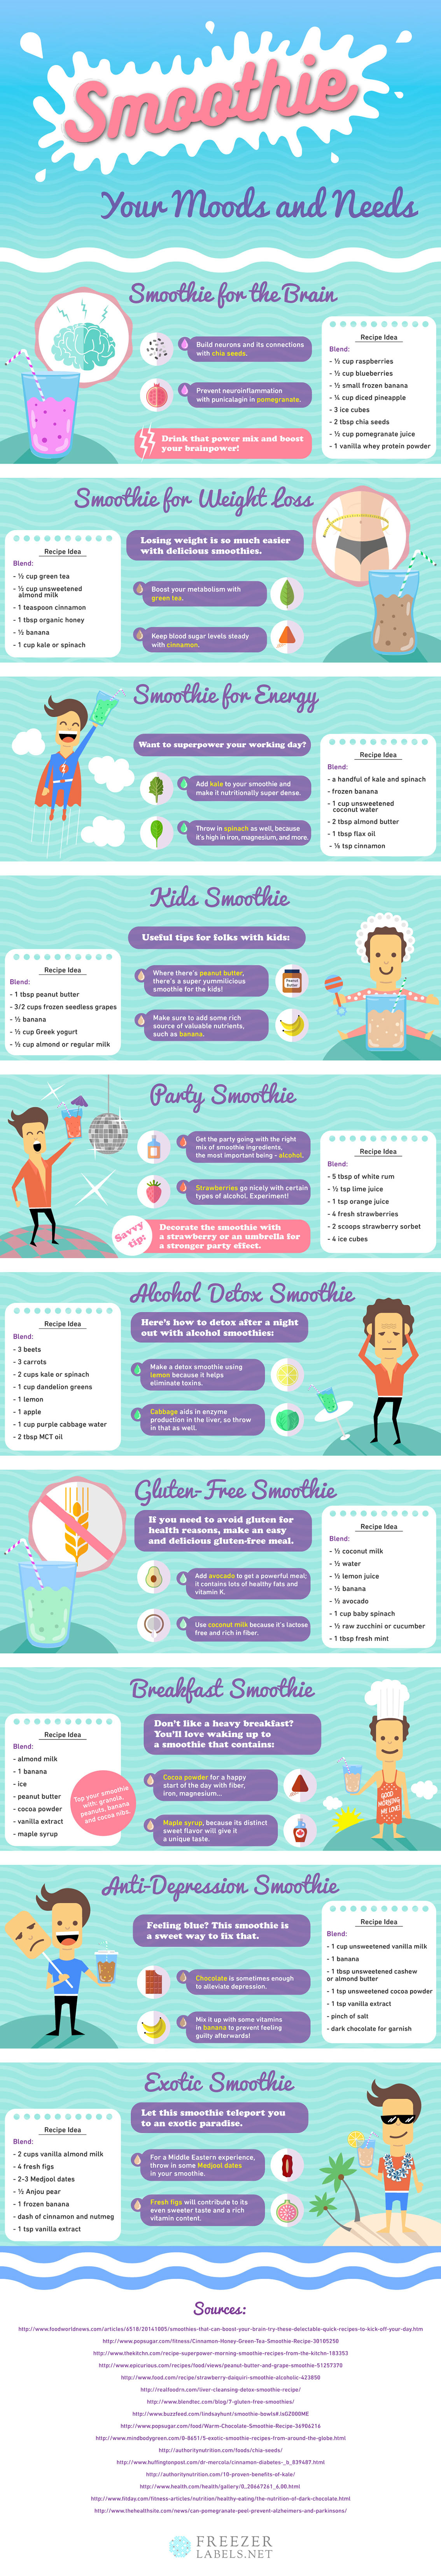 Smoothie Recipe for Weight Loss Energy Brain Drink Infographic